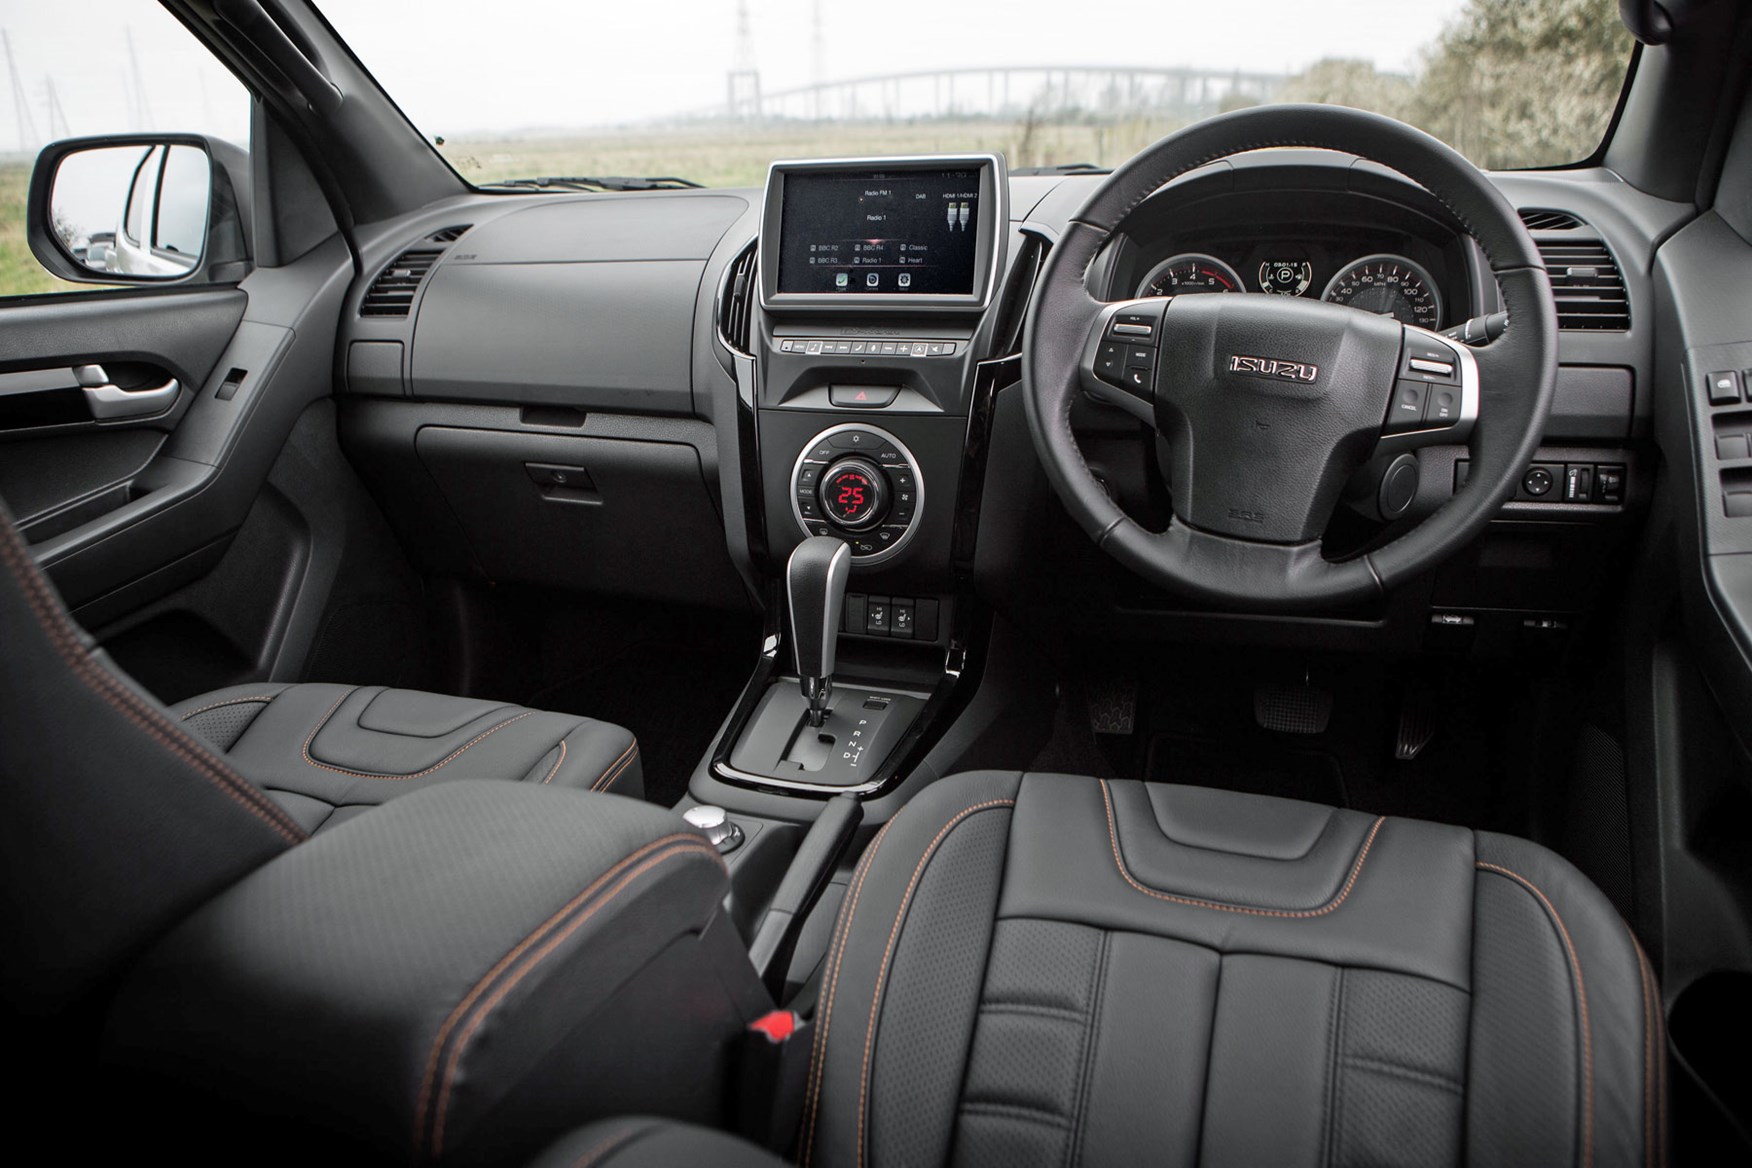 Isuzu D-Max Blade 1.9 review - cab interior including new integrated touchscreen infotainment system